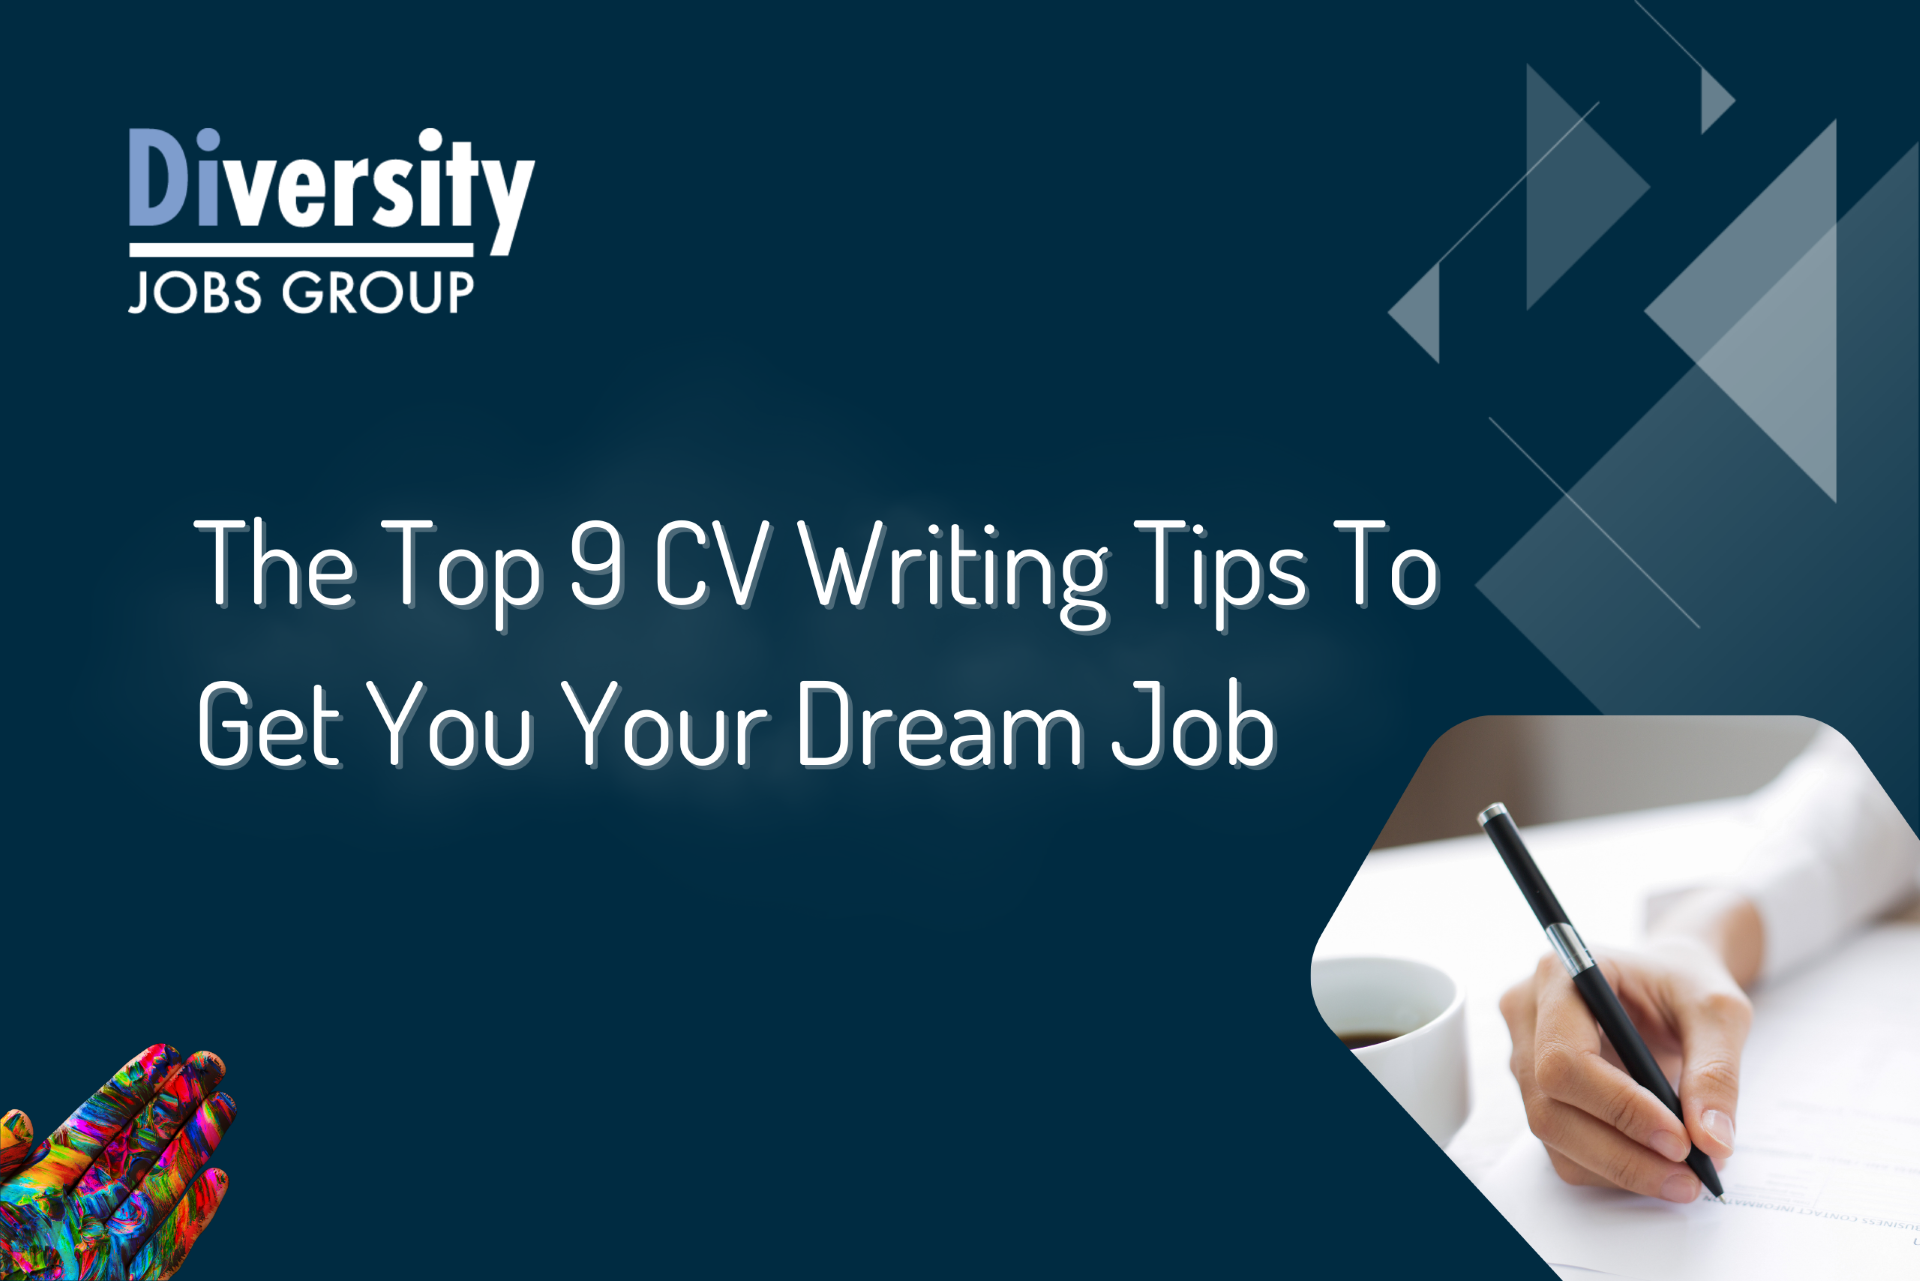 The Top 9 CV Writing Tips To Get You Your Dream Job